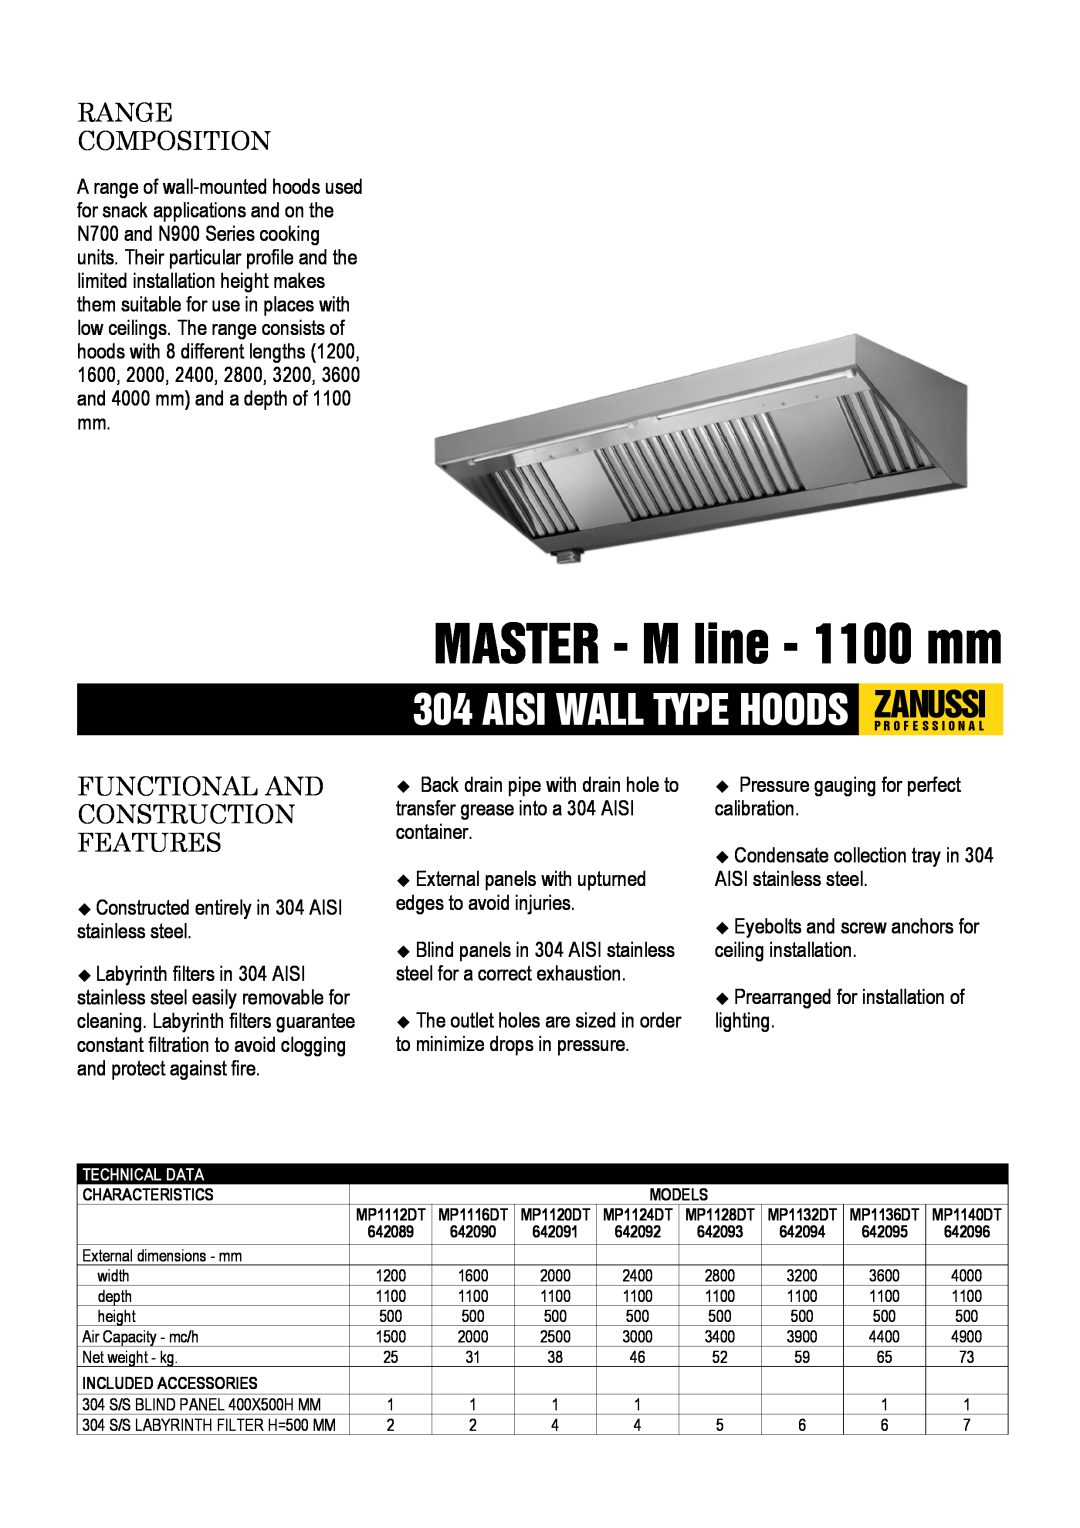 Zanussi 642095, 642089 dimensions MASTER - M line - 1100 mm, Range Composition, Functional And Construction Features 